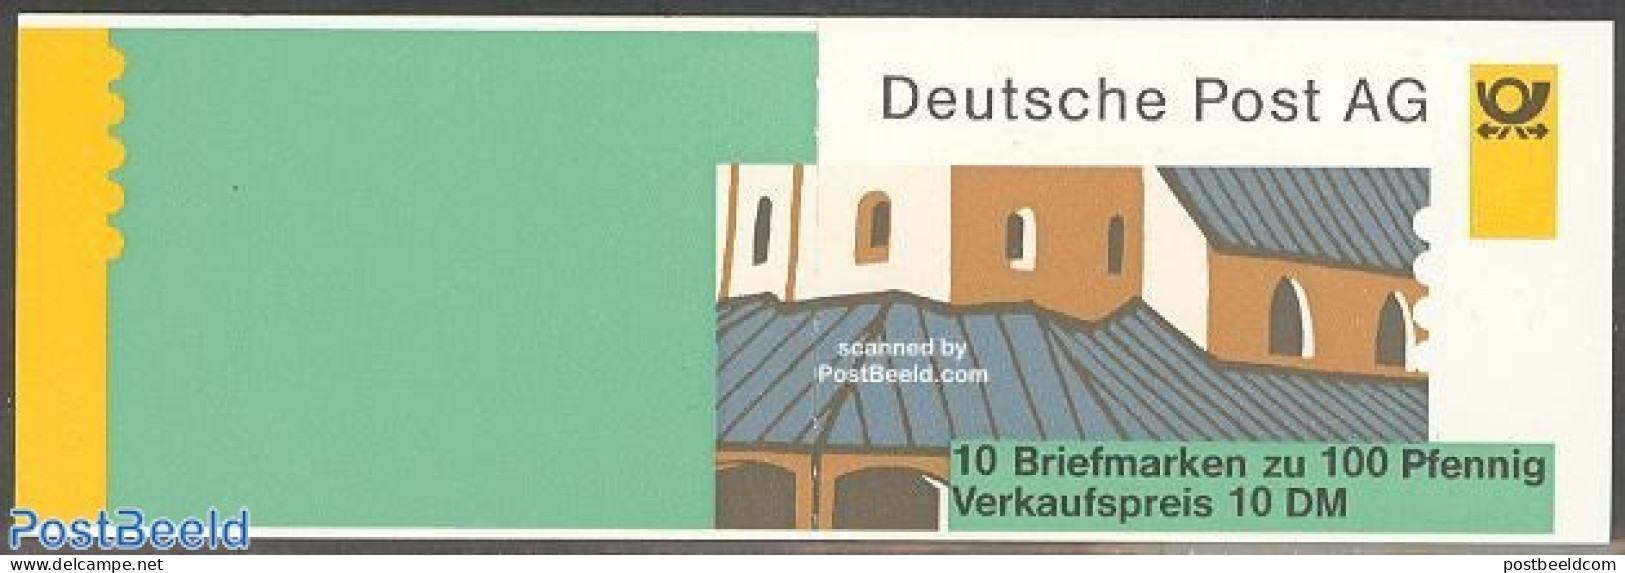 Germany, Federal Republic 1995 Altotting Booklet, Mint NH, Religion - Churches, Temples, Mosques, Synagogues - Stamp B.. - Unused Stamps